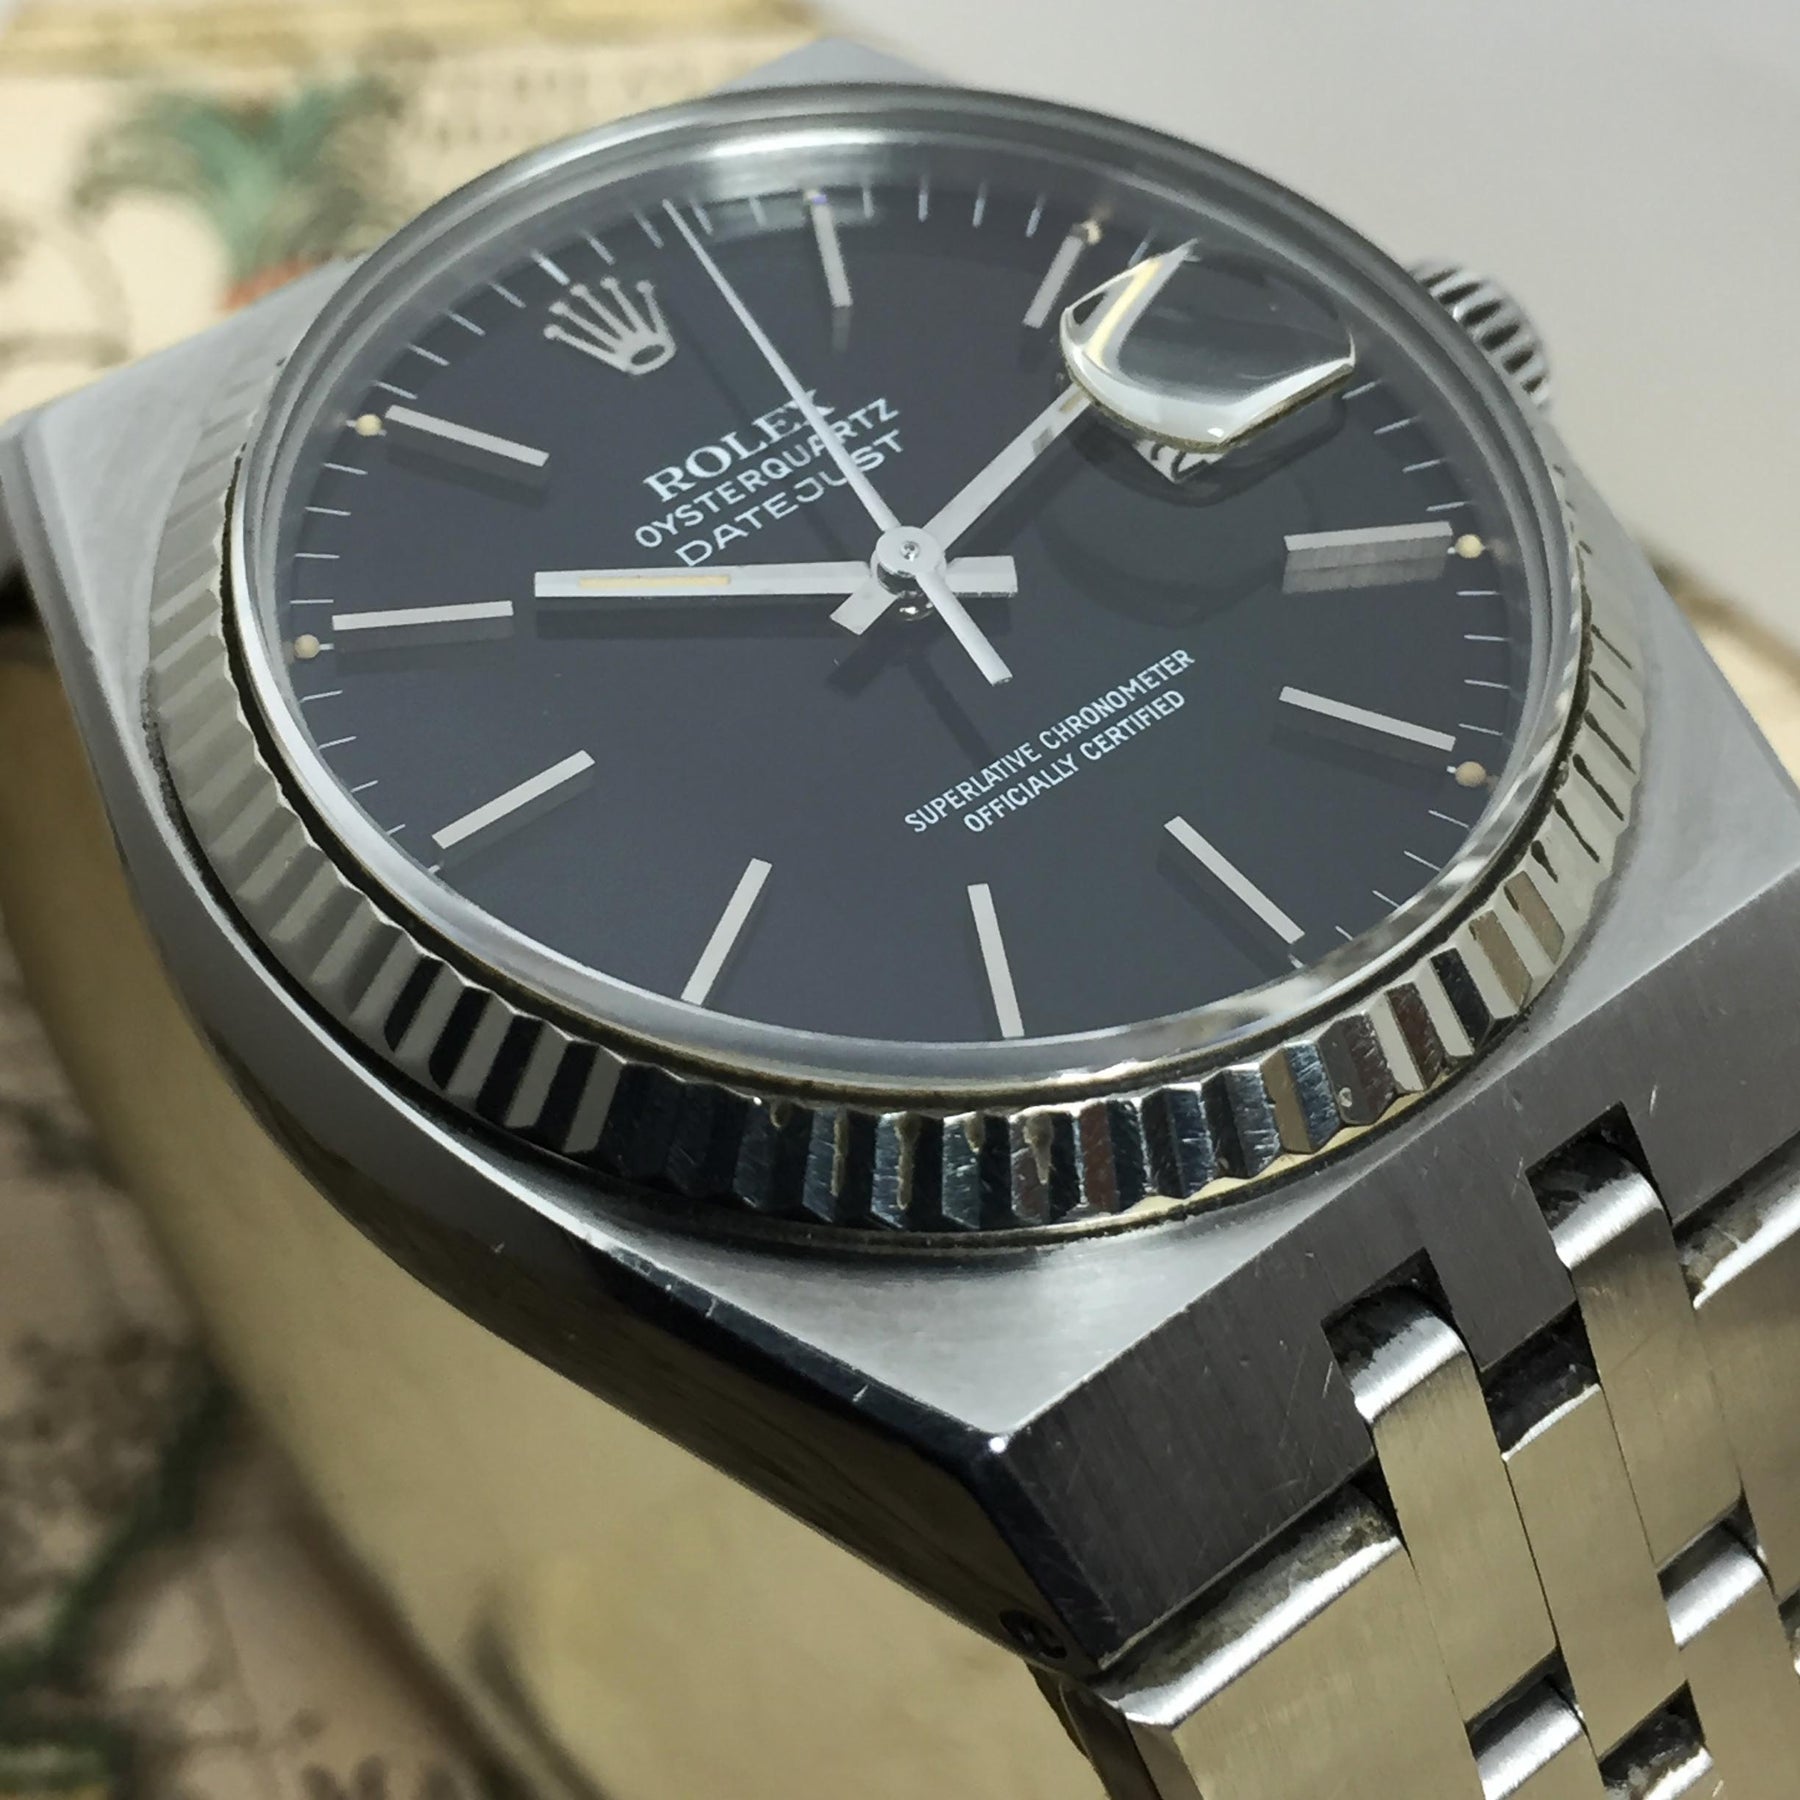 1981 Rolex Oysterquartz Datejust Ref. 17014 (with Papers)